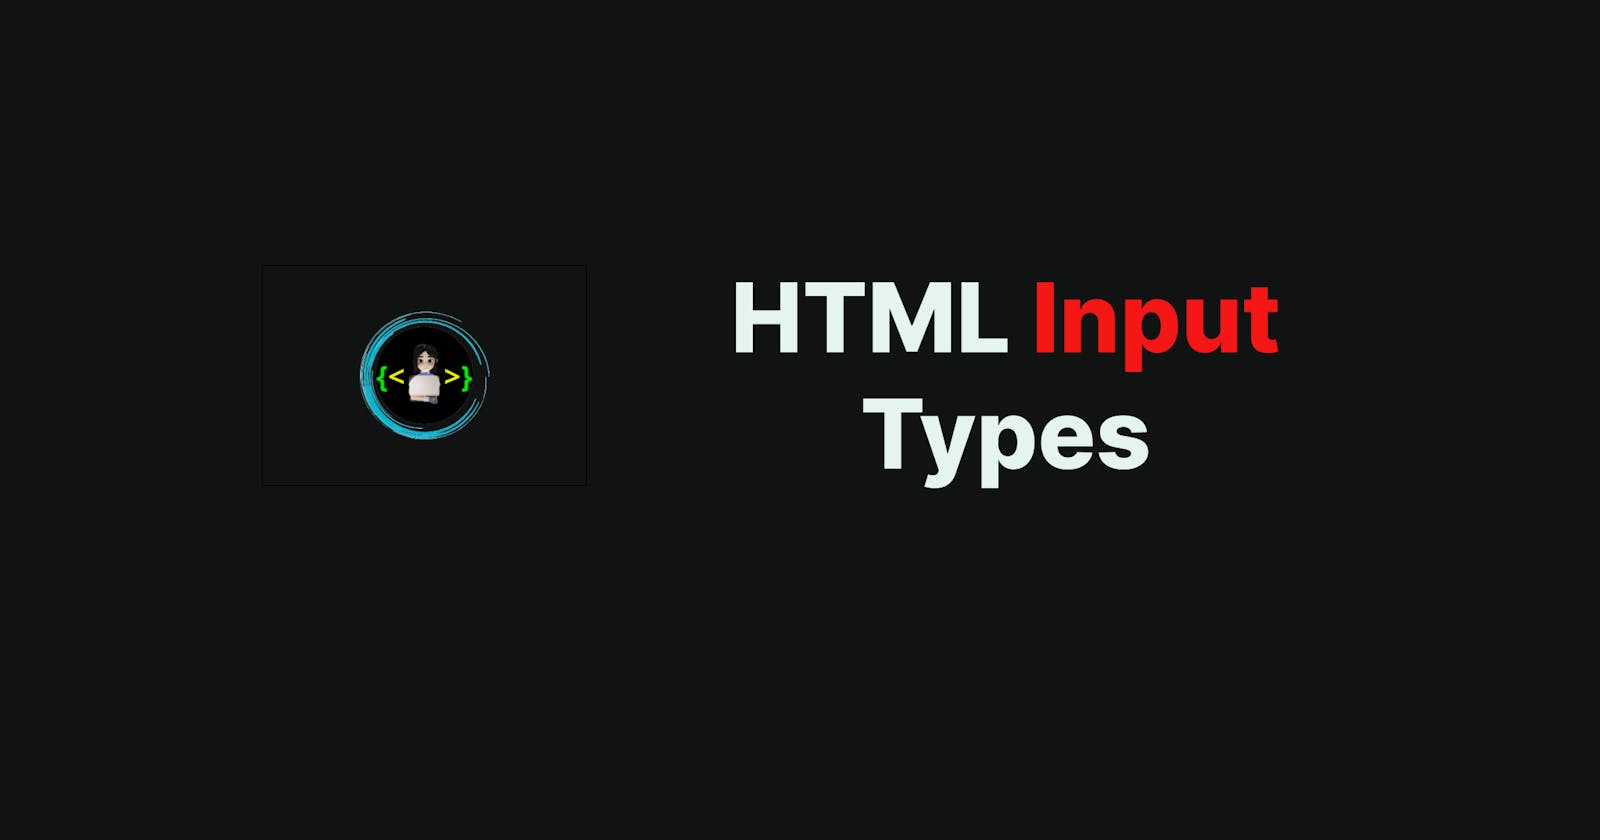 |An Overview of HTML Input Elements|